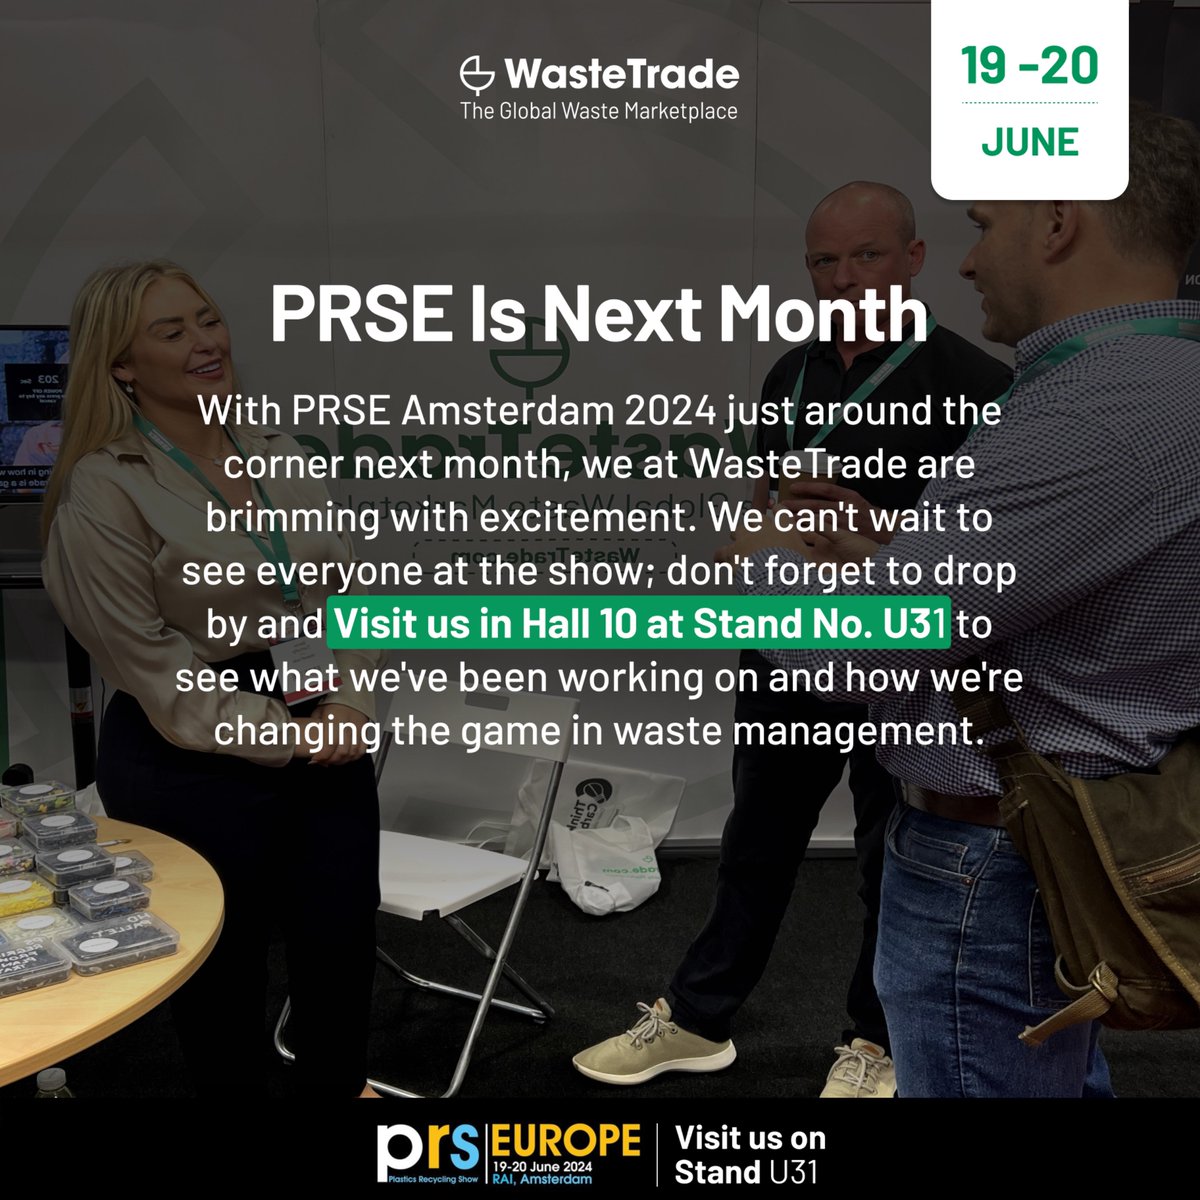 PRSE 2024 is next month on June 19-20th in Amsterdam.

WasteTrade will be exhibiting in Hall 10, at Stand No. U31.

Book a 1-2-1 meeting: calendly.com/support-wastet…

#prse #prse2024 #plastic #plasticrecycling #recycling #waste #plasticwaste #wastemanagement